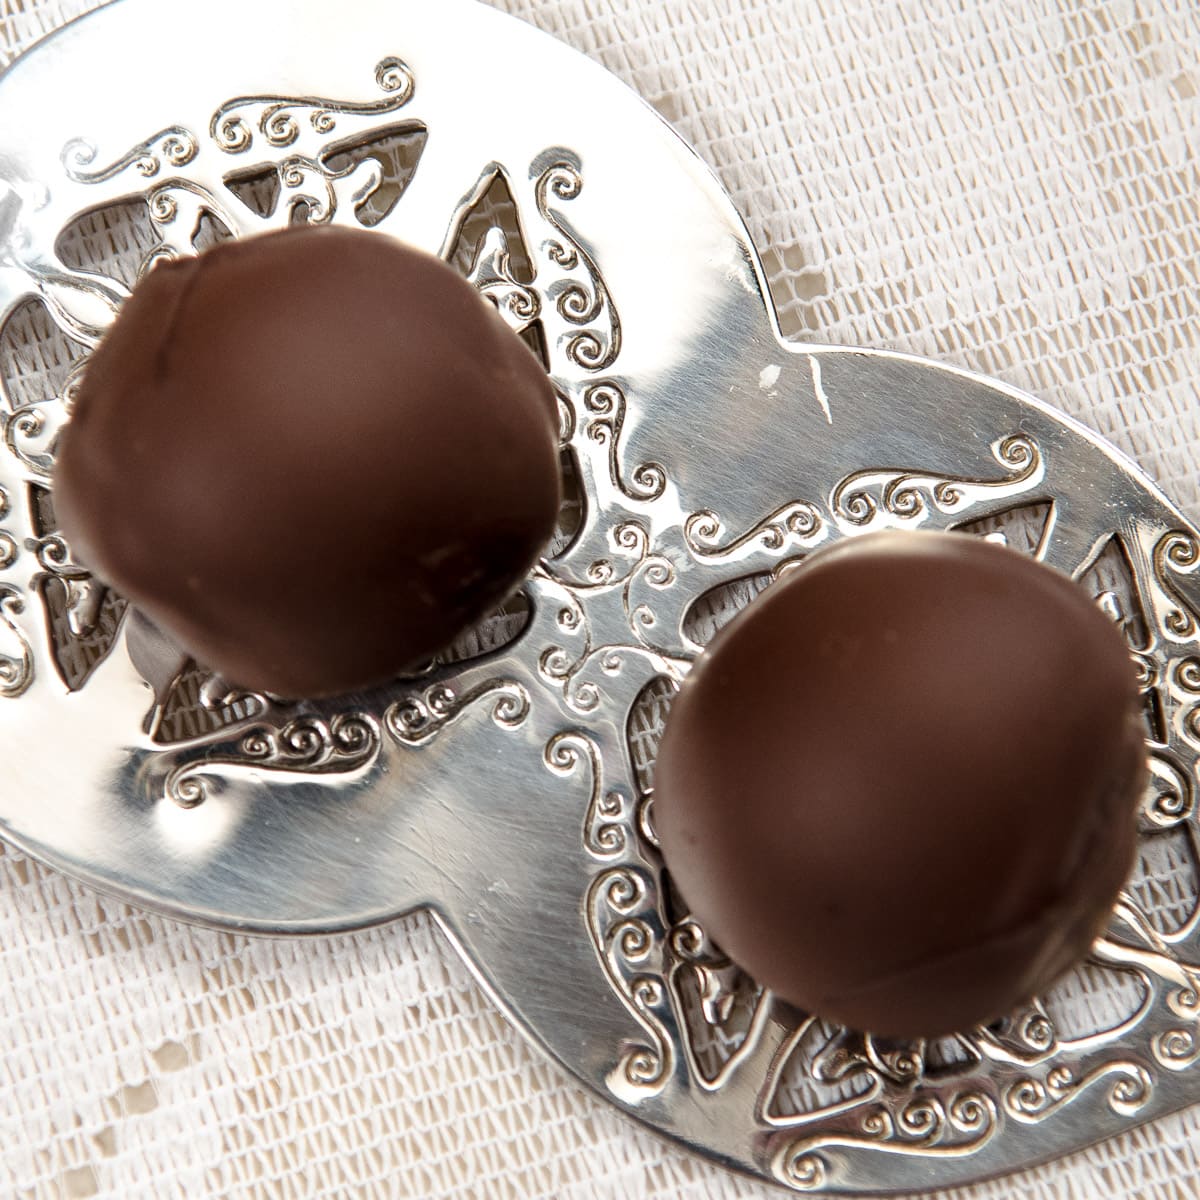 Two chocolate truffles on a silver serving dish.